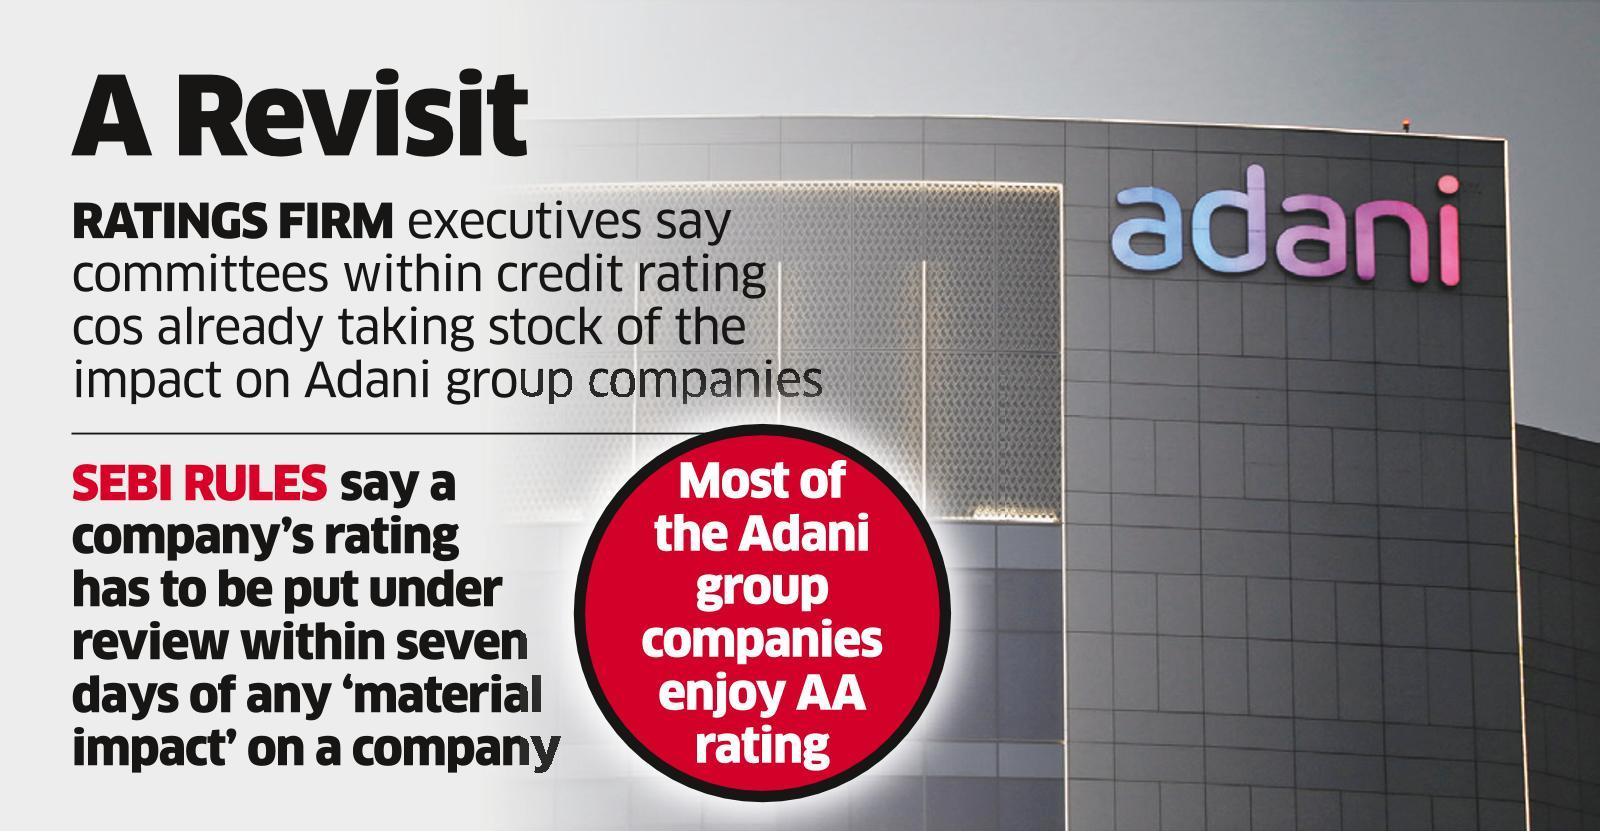 the credit rating agencies are asked by sebi about the ratings of the loans and securities of the adani group.